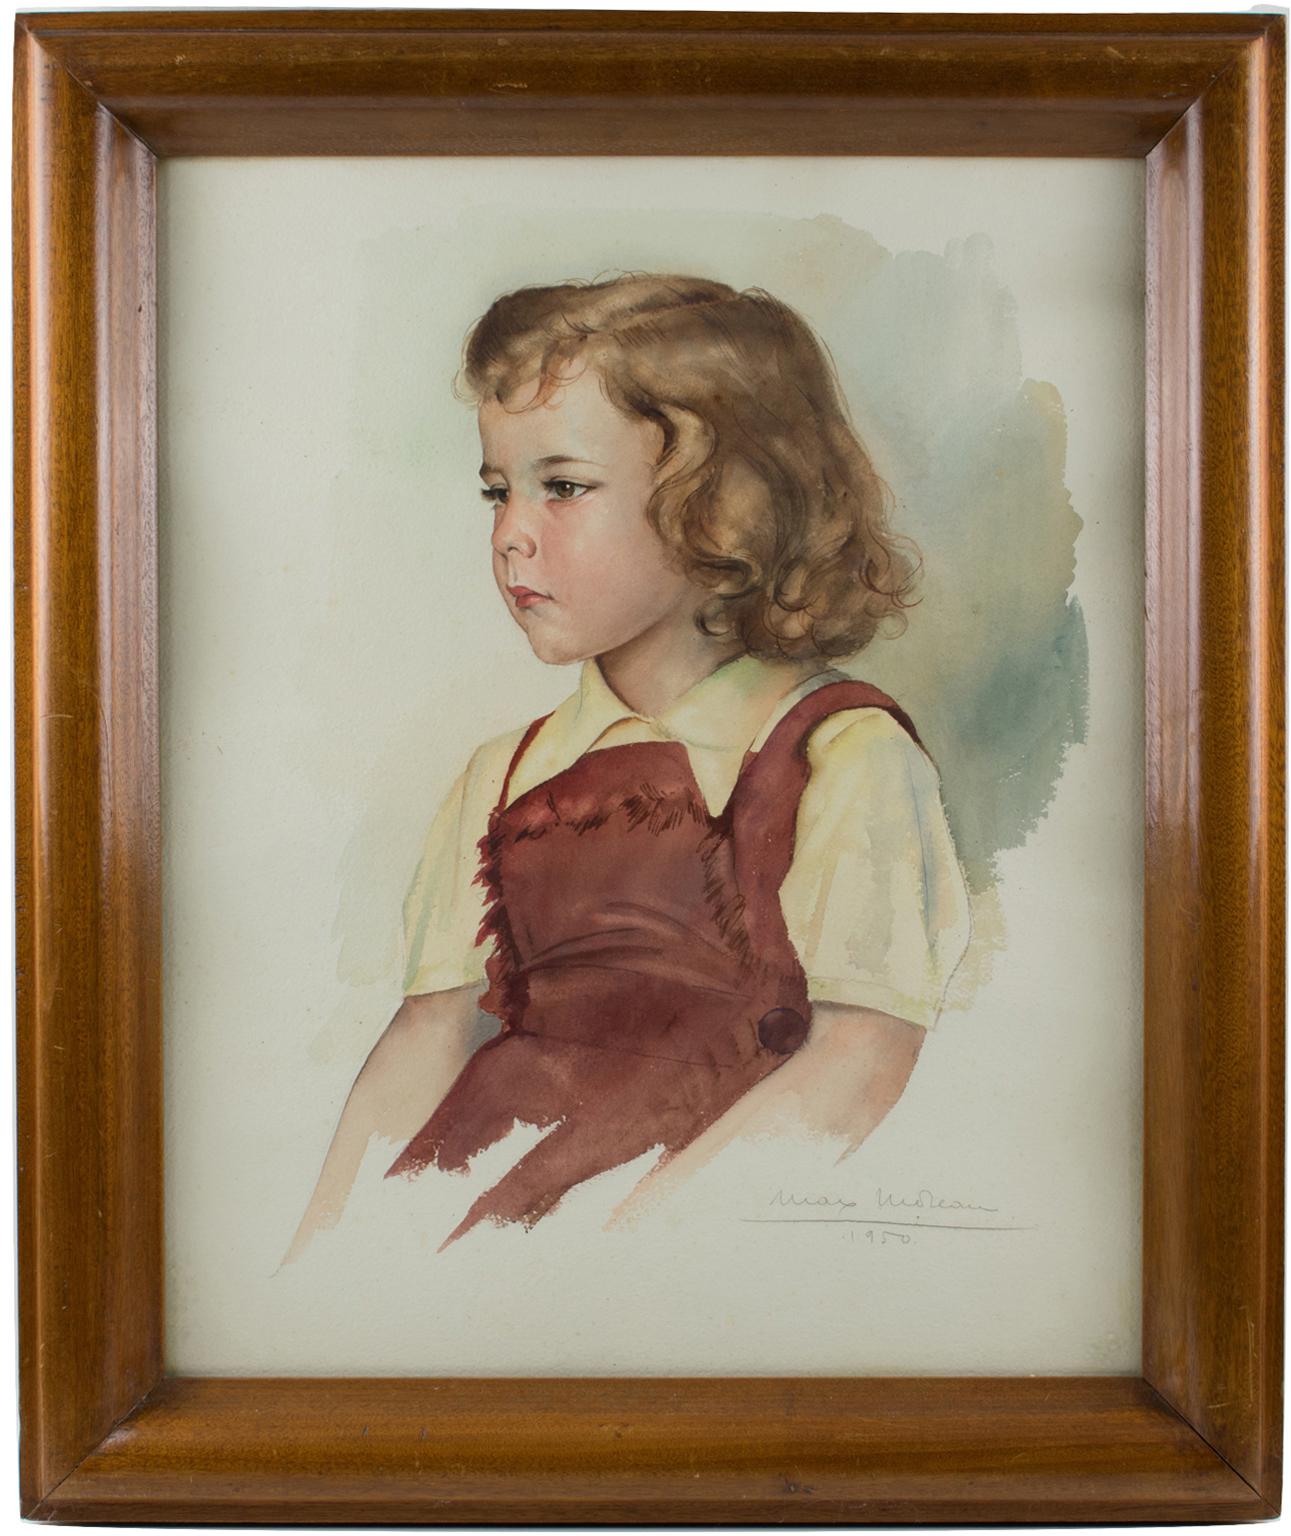 1950s portrait, gouache on paper painting by Belgian artist Max Moreau (1902 - 1992).
A finely detailed portrait of a lovely young girl looking like a good child from the period right after WWII. Moreau captures the sweet expression, soft features,